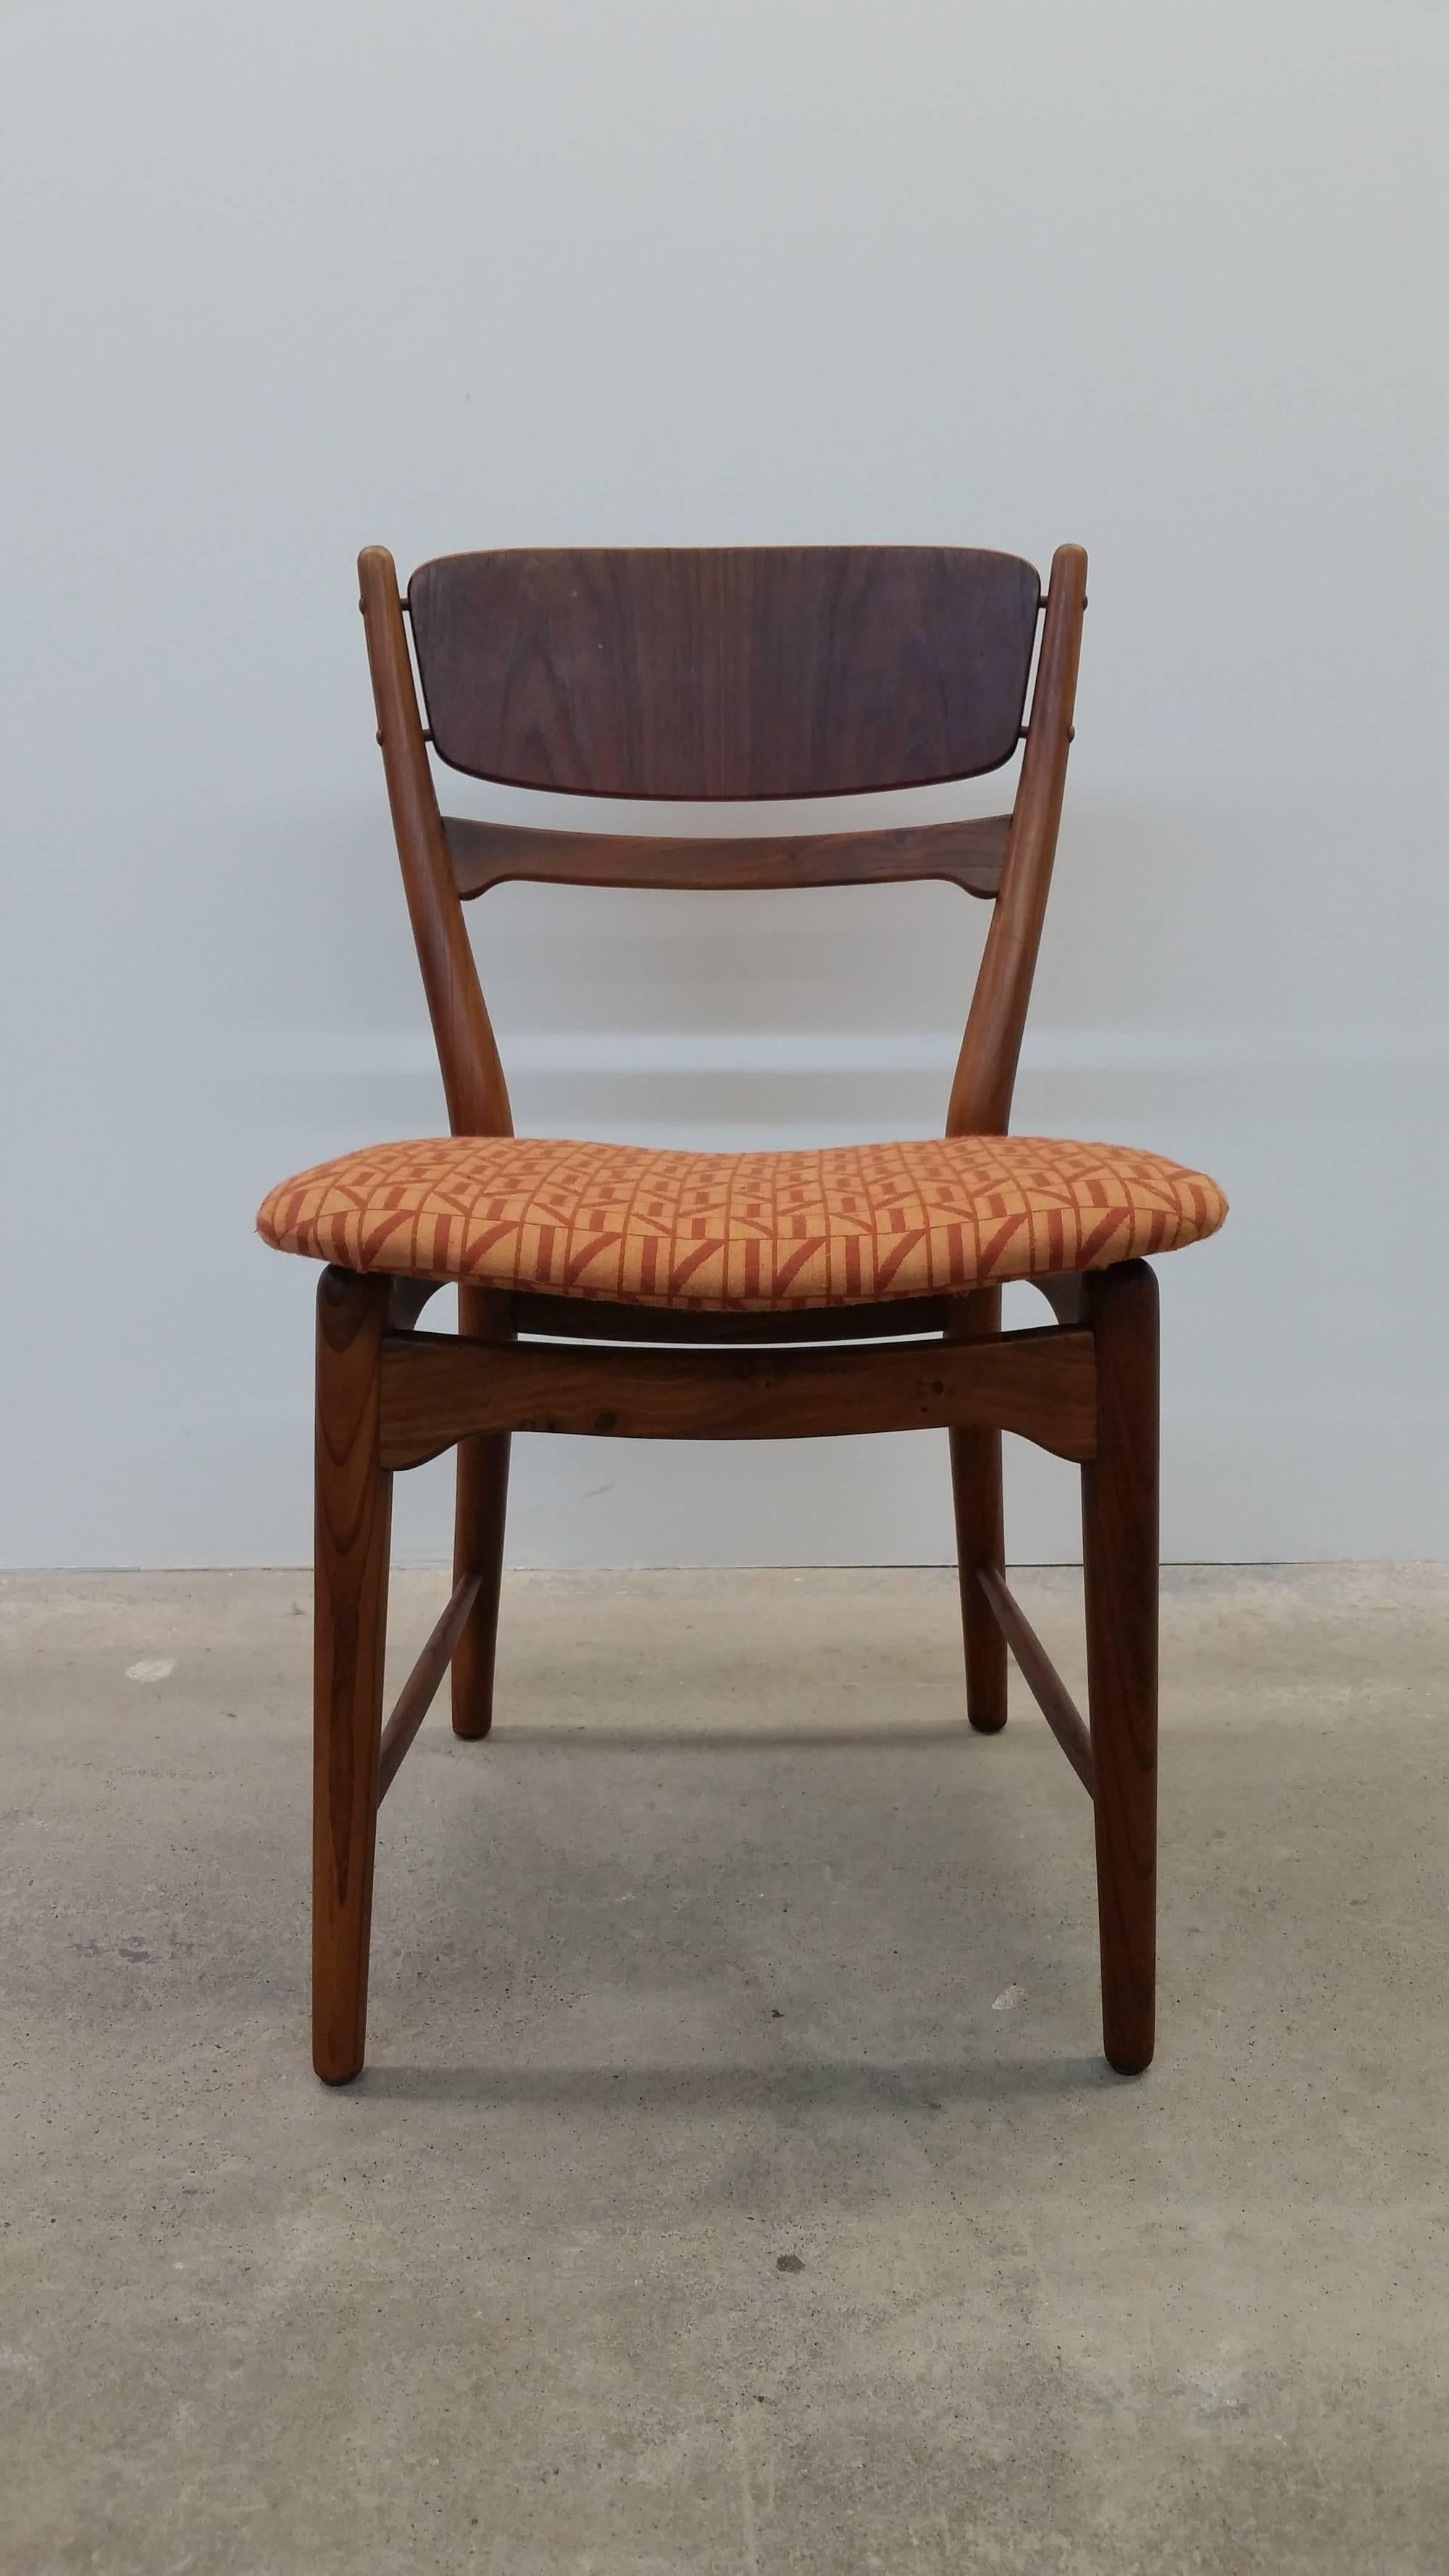 Set of four dining chairs in walnut and teak, Arne Wahl Iversen and produced by Soro Stolefabrik, Denmark, circa 1955. 